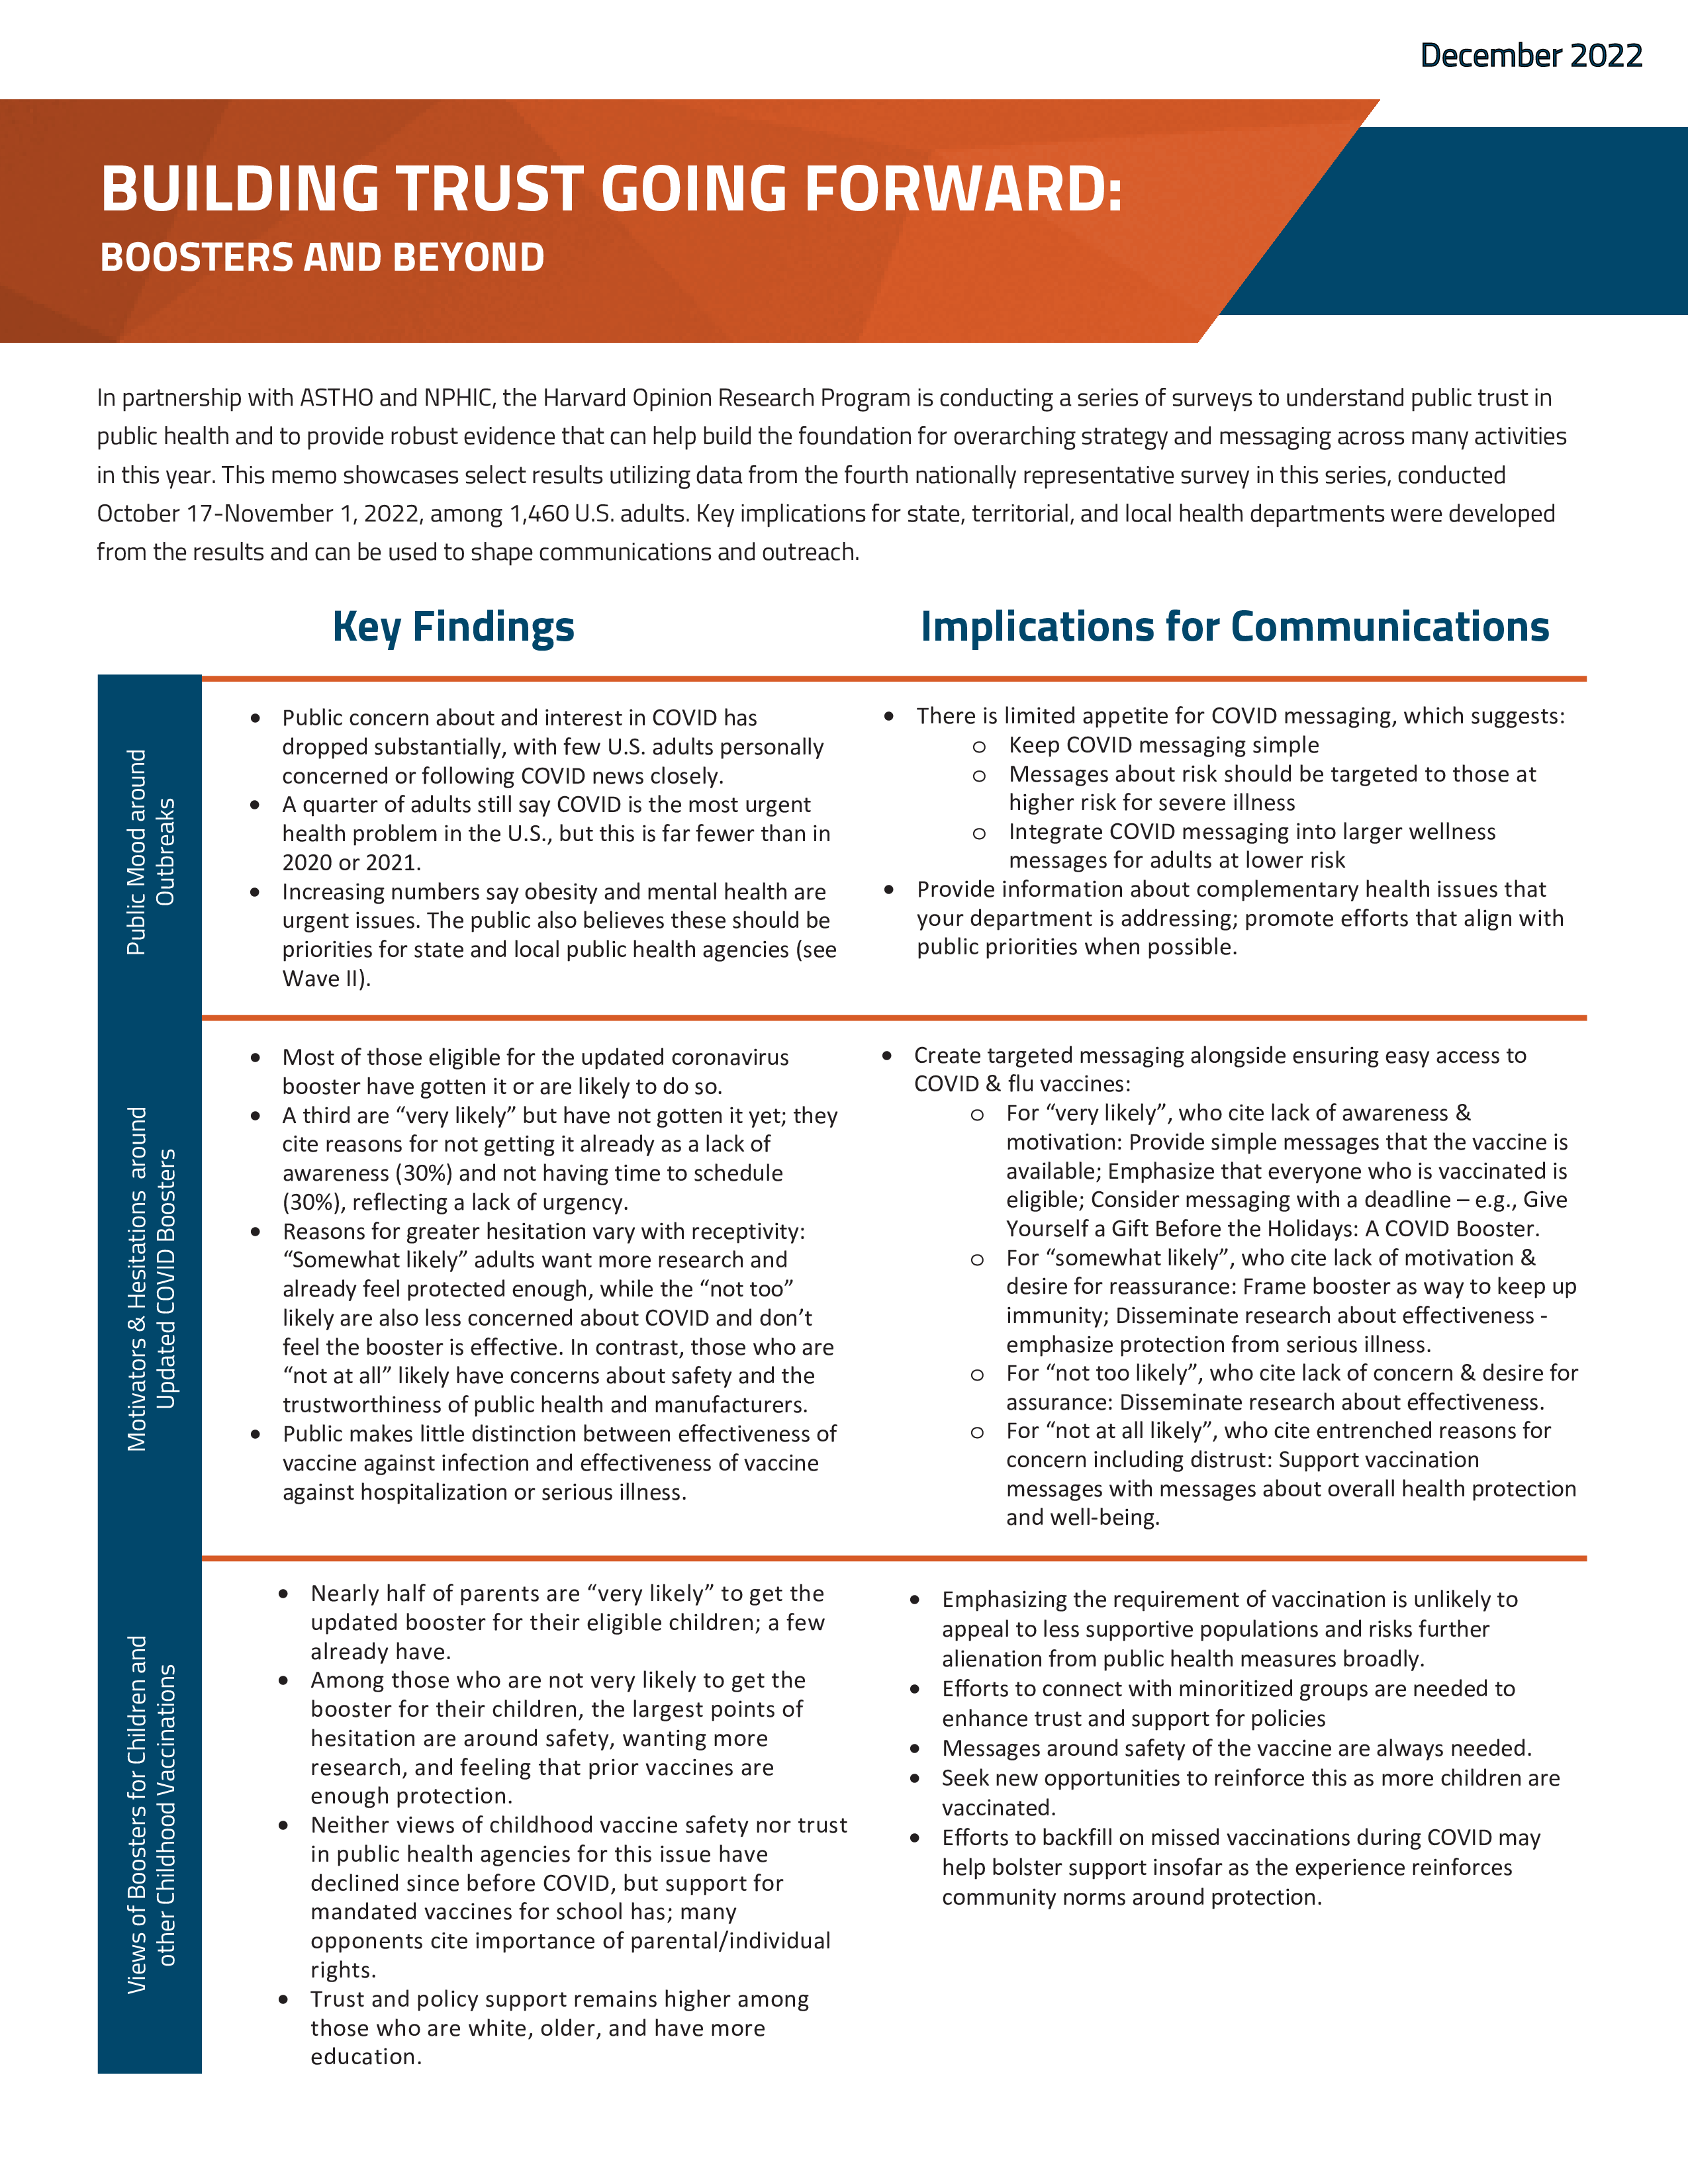 key findings, implications, and messaging tips to build trust in communities. Association of State and Territorial Health Officials, the National Public Health Information Coalition, and the Harvard T.H. Chan School of Public Health logos are at the bottom.